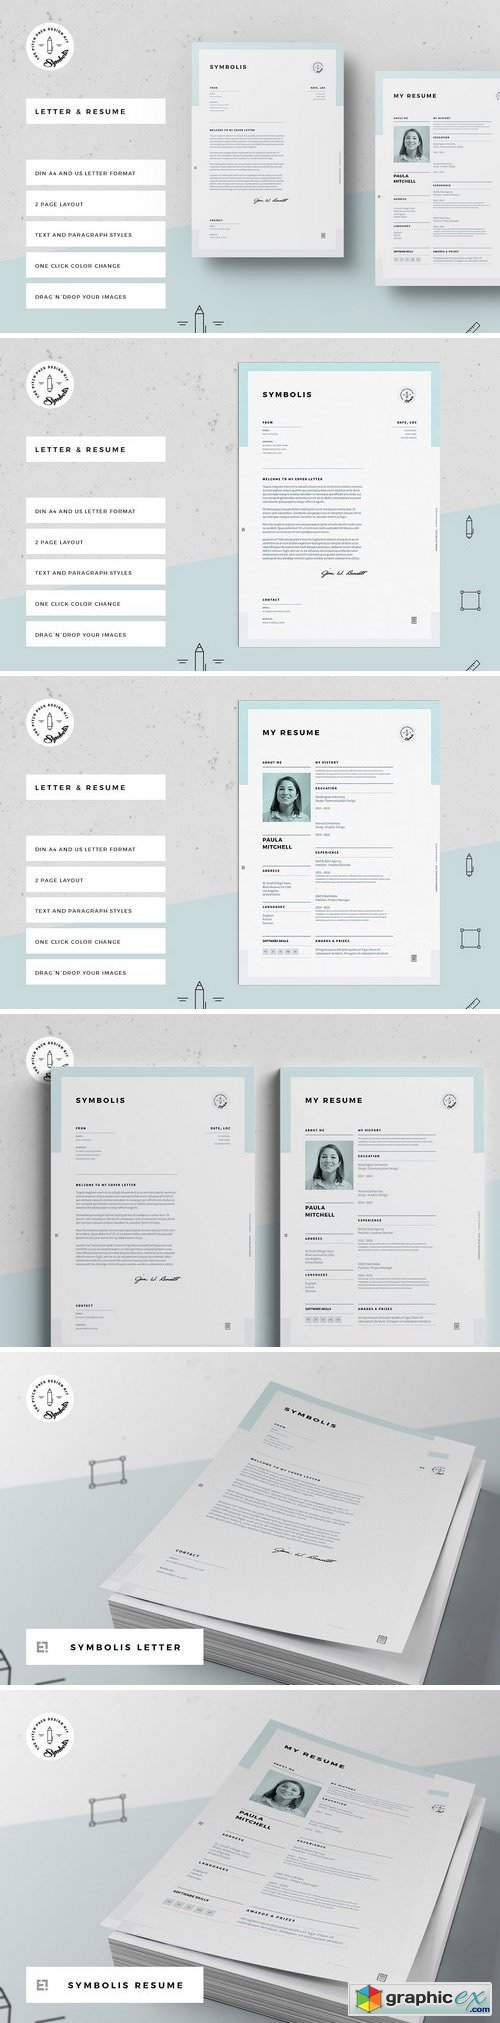 Symbolis Resume and Letter